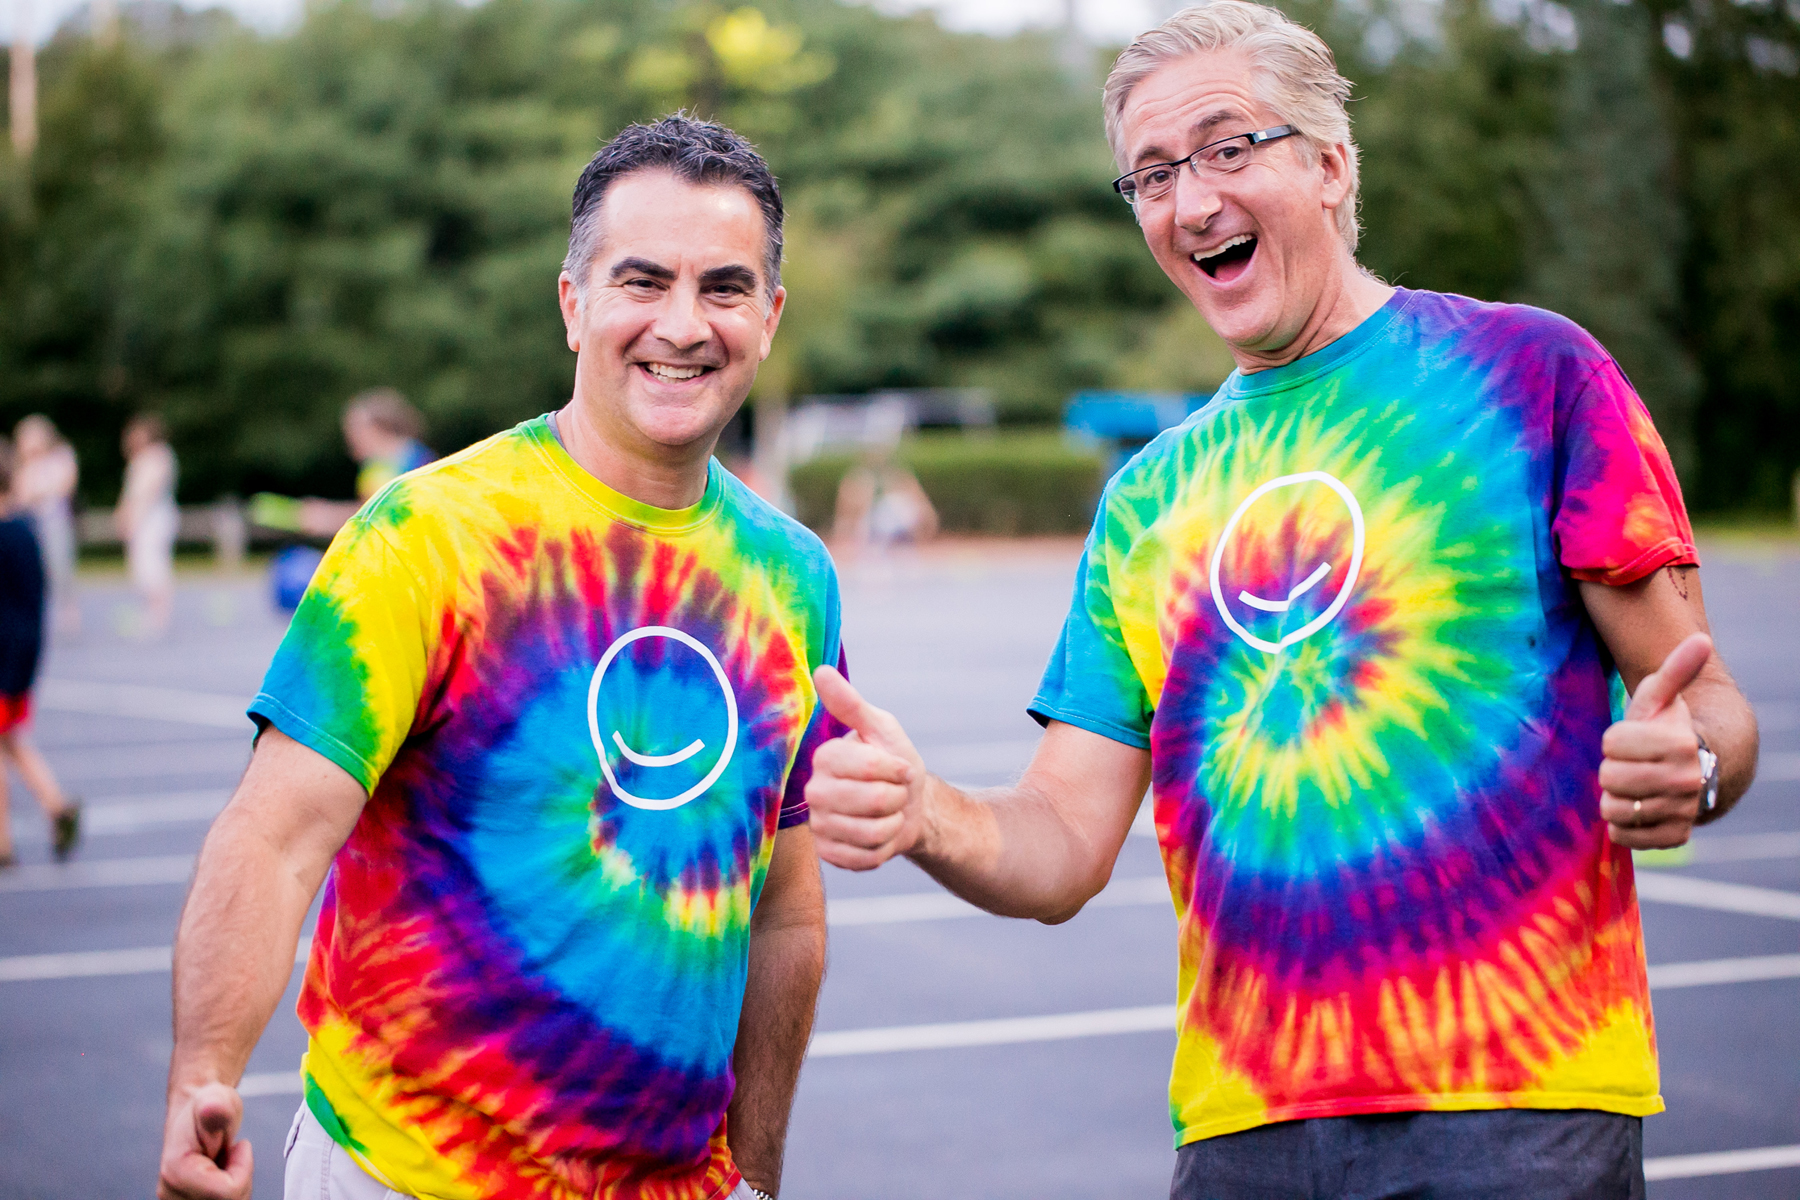 Dr. O'Leary and Dr. Hack smiling in a parking lot, wearing tie-dye OASECT tee shirts on movie night